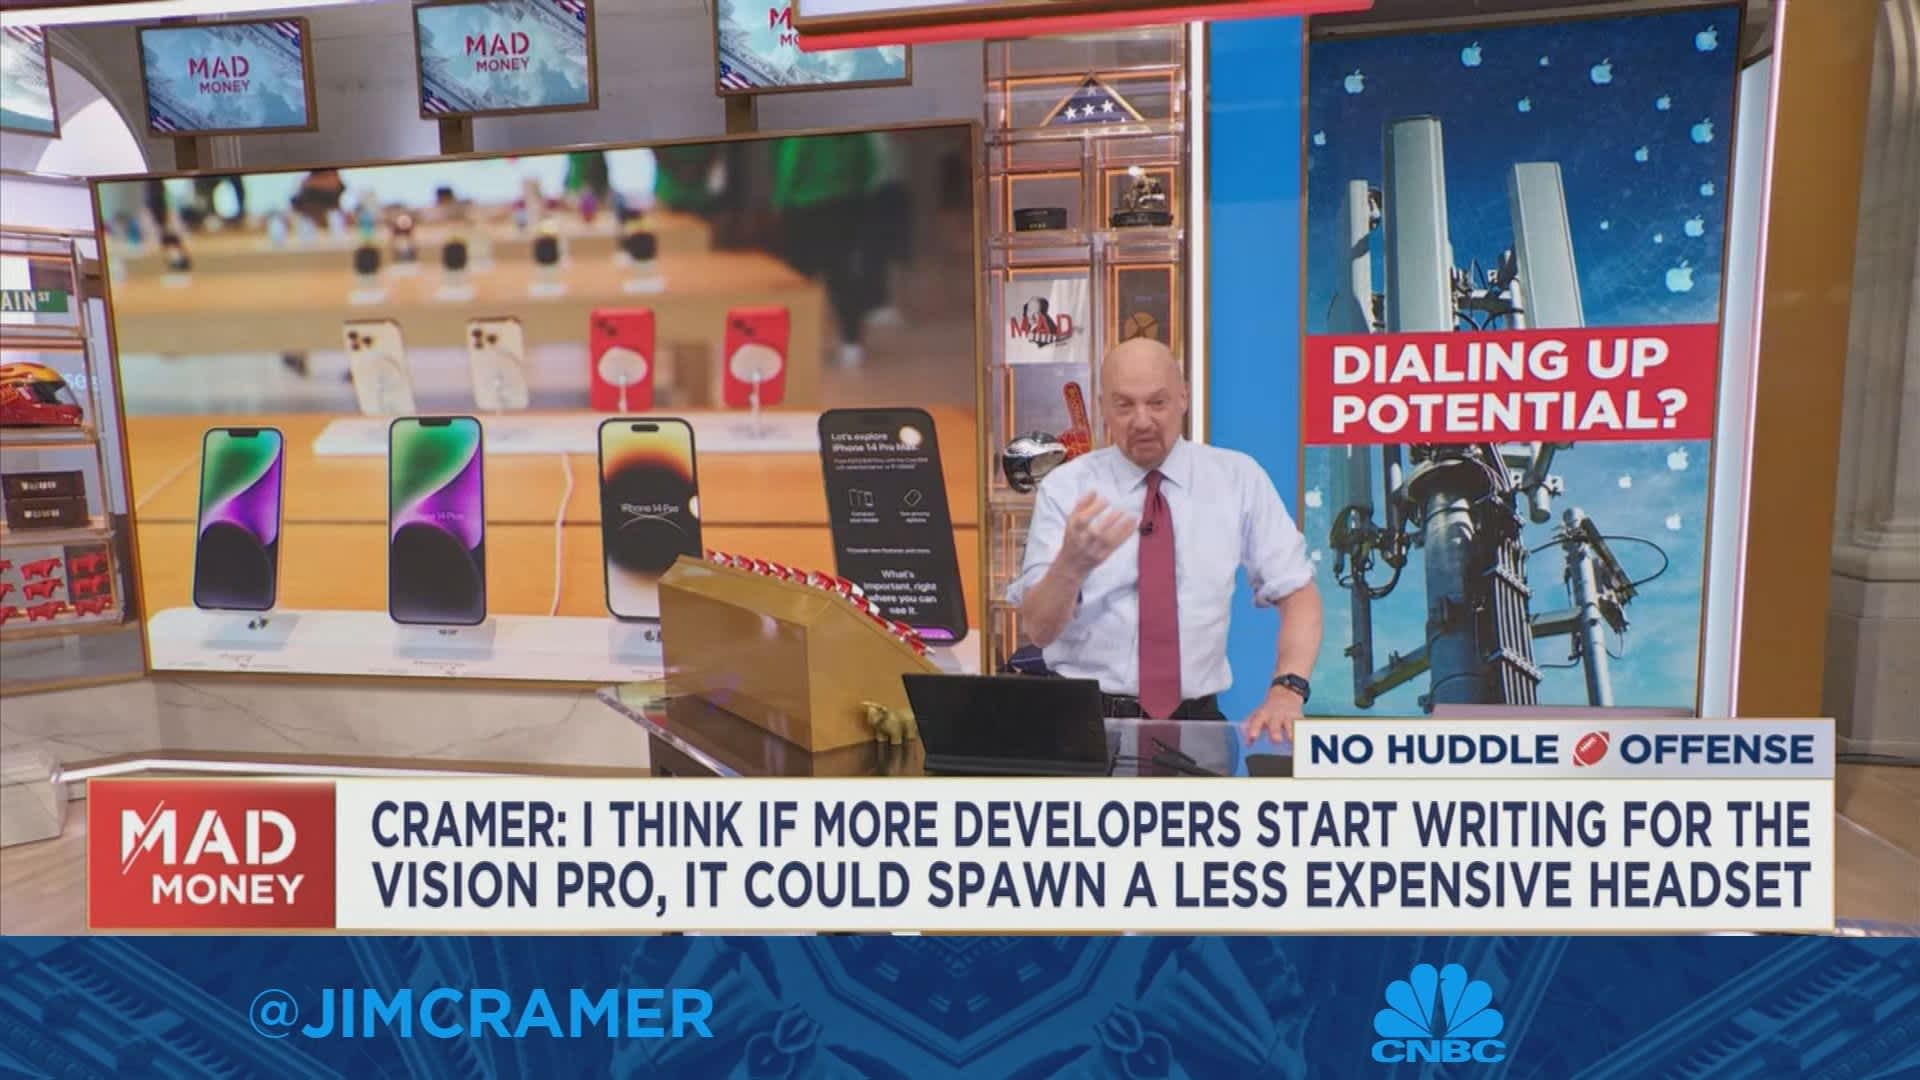 Cell carriers could find opportunity in selling Apple Vision Pro, says Jim Cramer